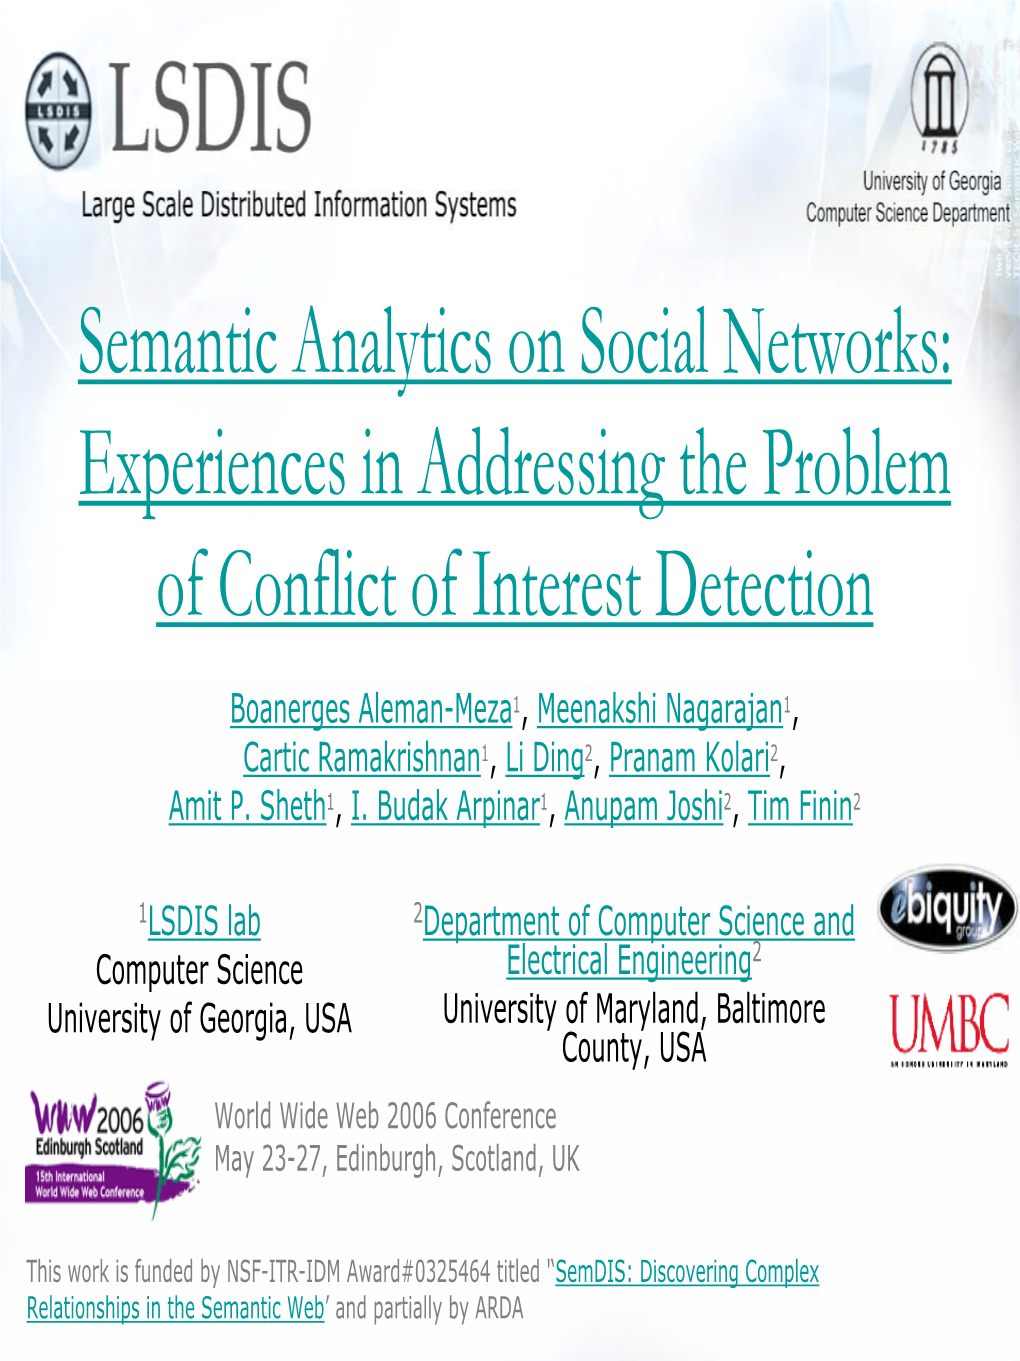 Semantic Analytics on Social Networks: Experiences in Addressing the Problem of Conflict of Interest Detection